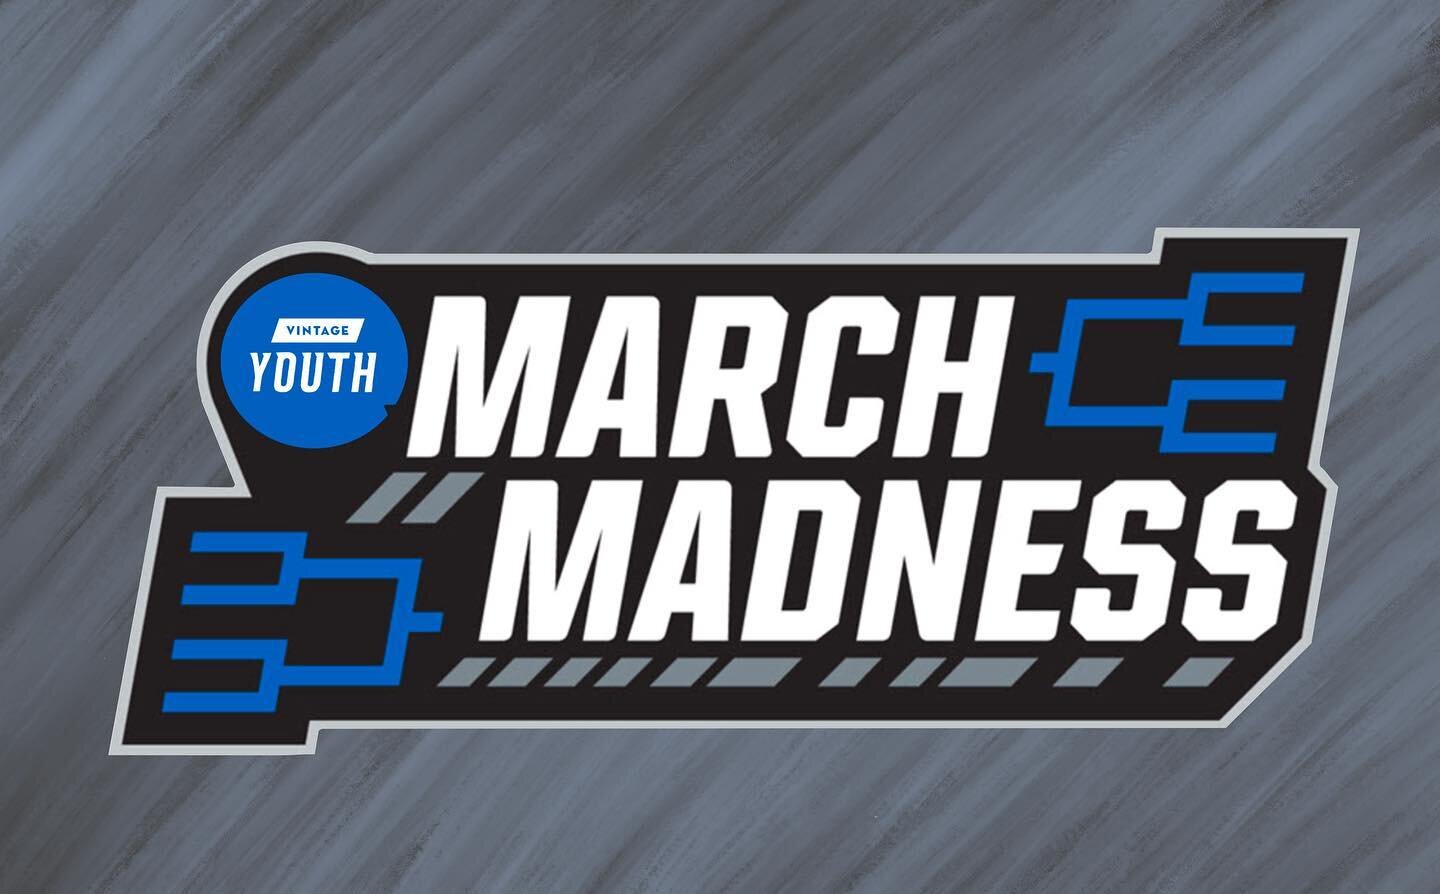 How is your small group team doing in March Madness??? Join us at 7pm tonight for more chances to earn points for your team!!!